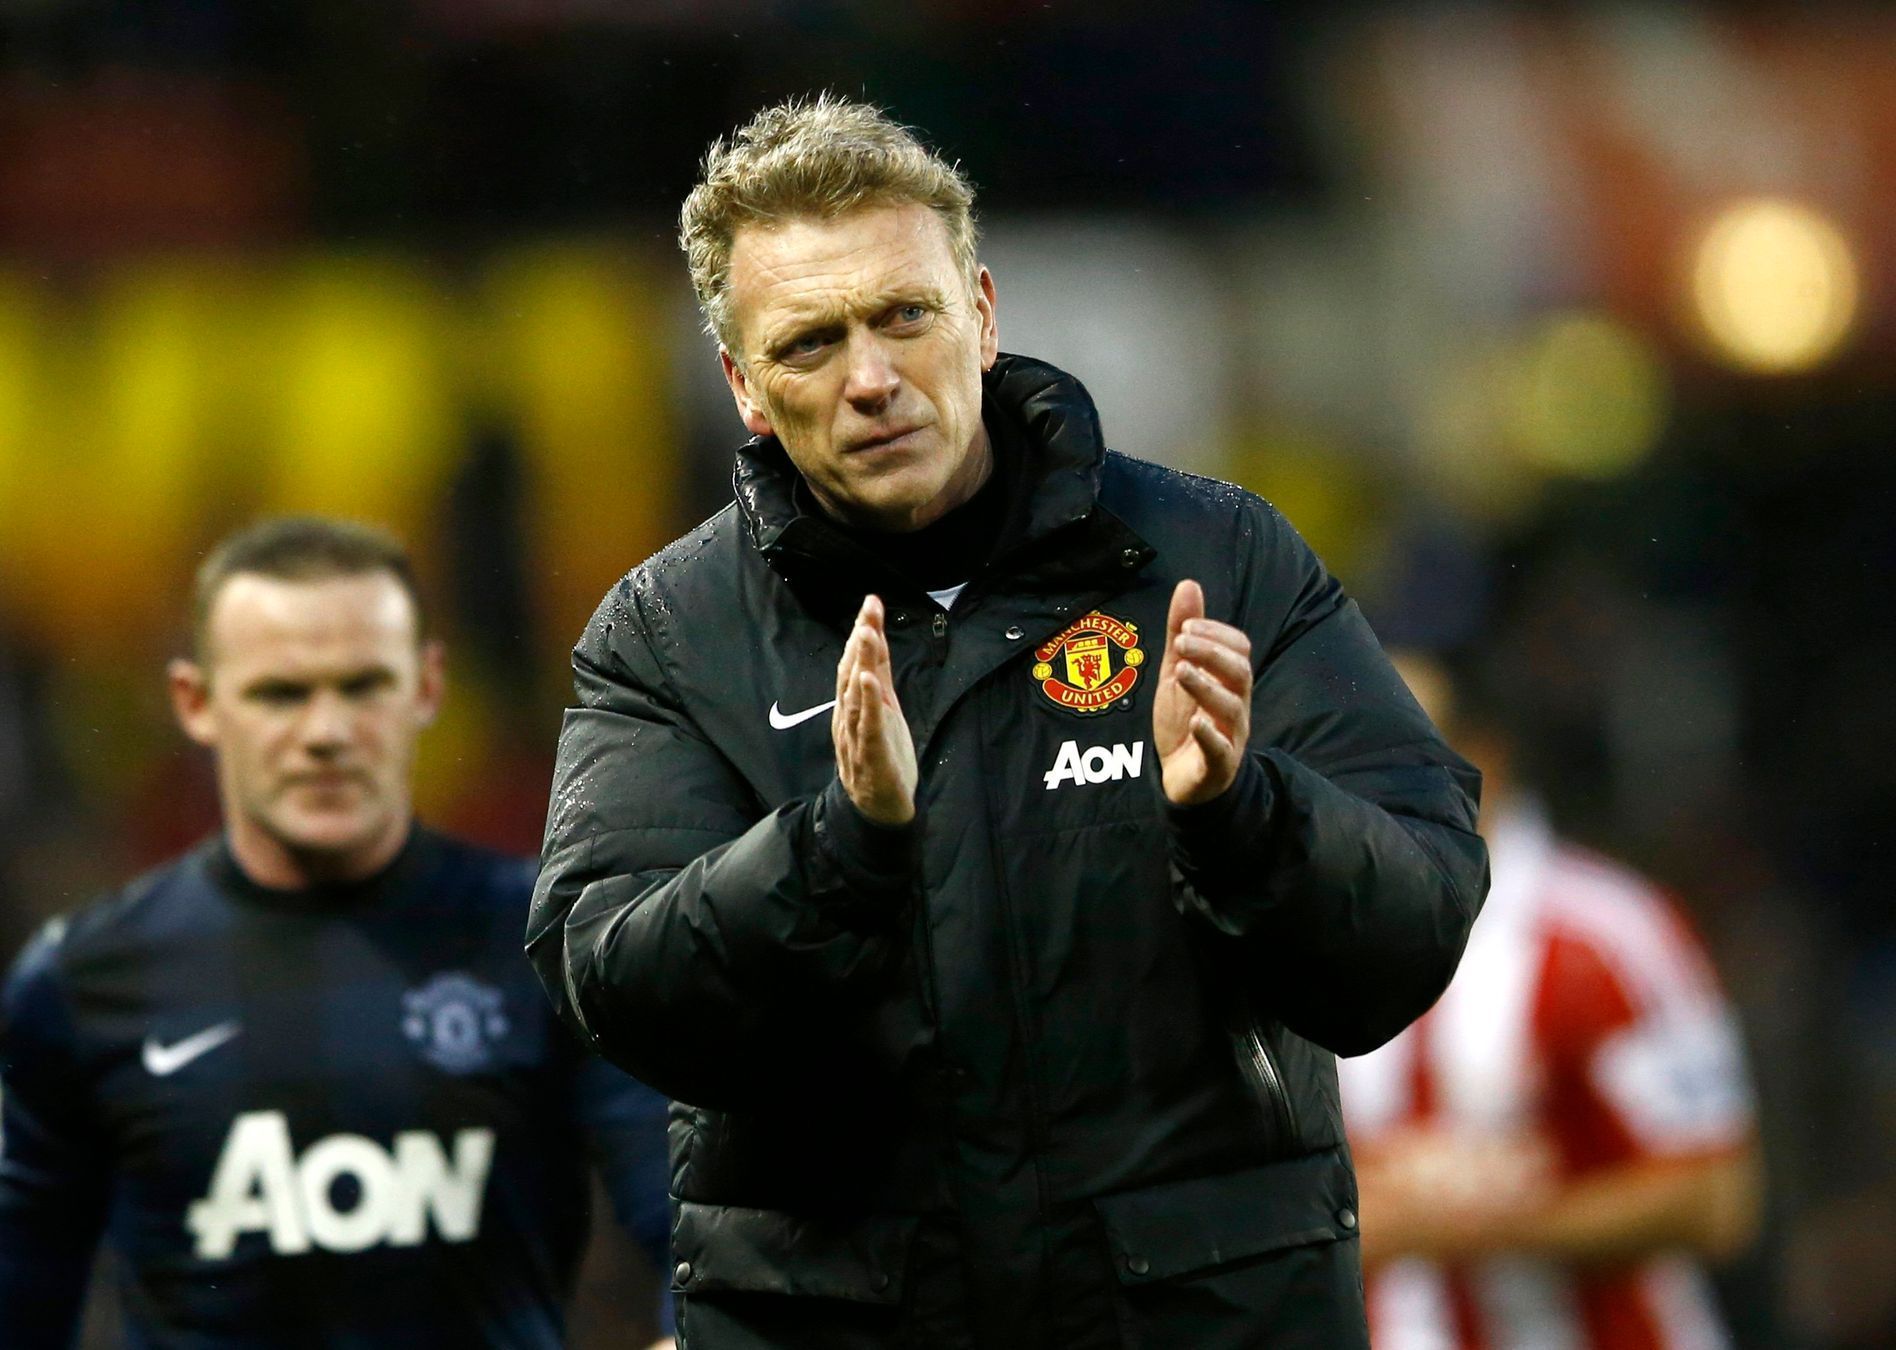 Manchester United manager Moyes reacts after their English Premier League soccer match against Stoke City at the Britannia Stadium in Stoke-on-Trent